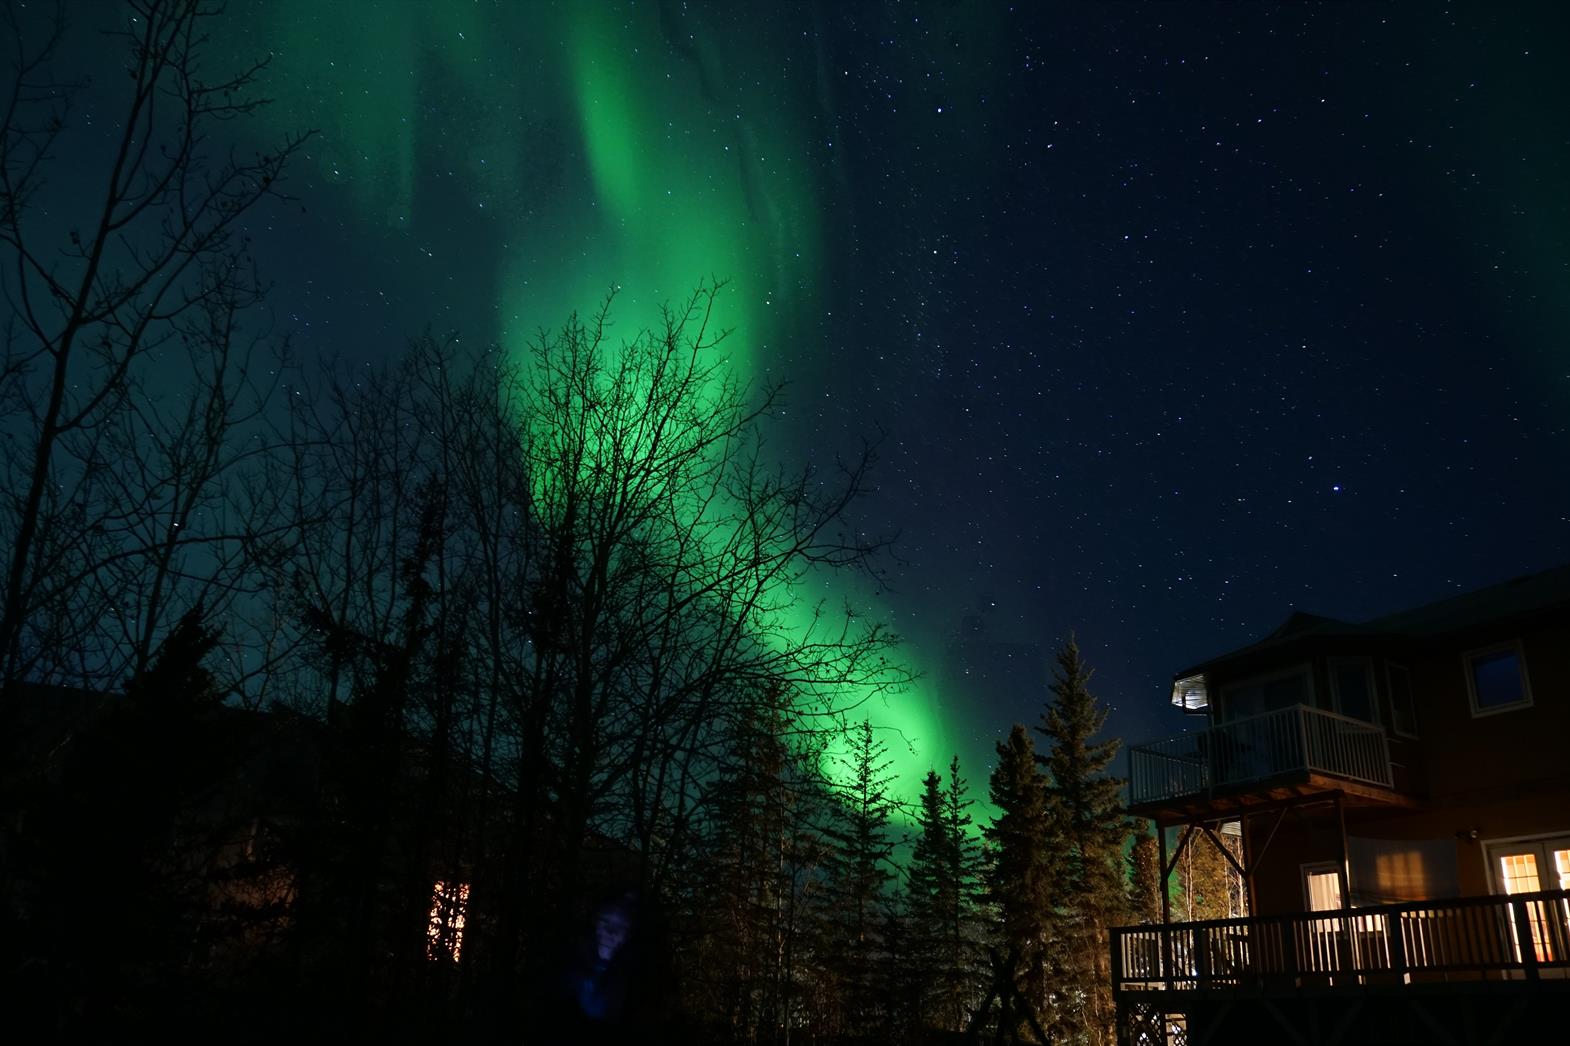 Norther lights in the night sky over a warmly lit house.